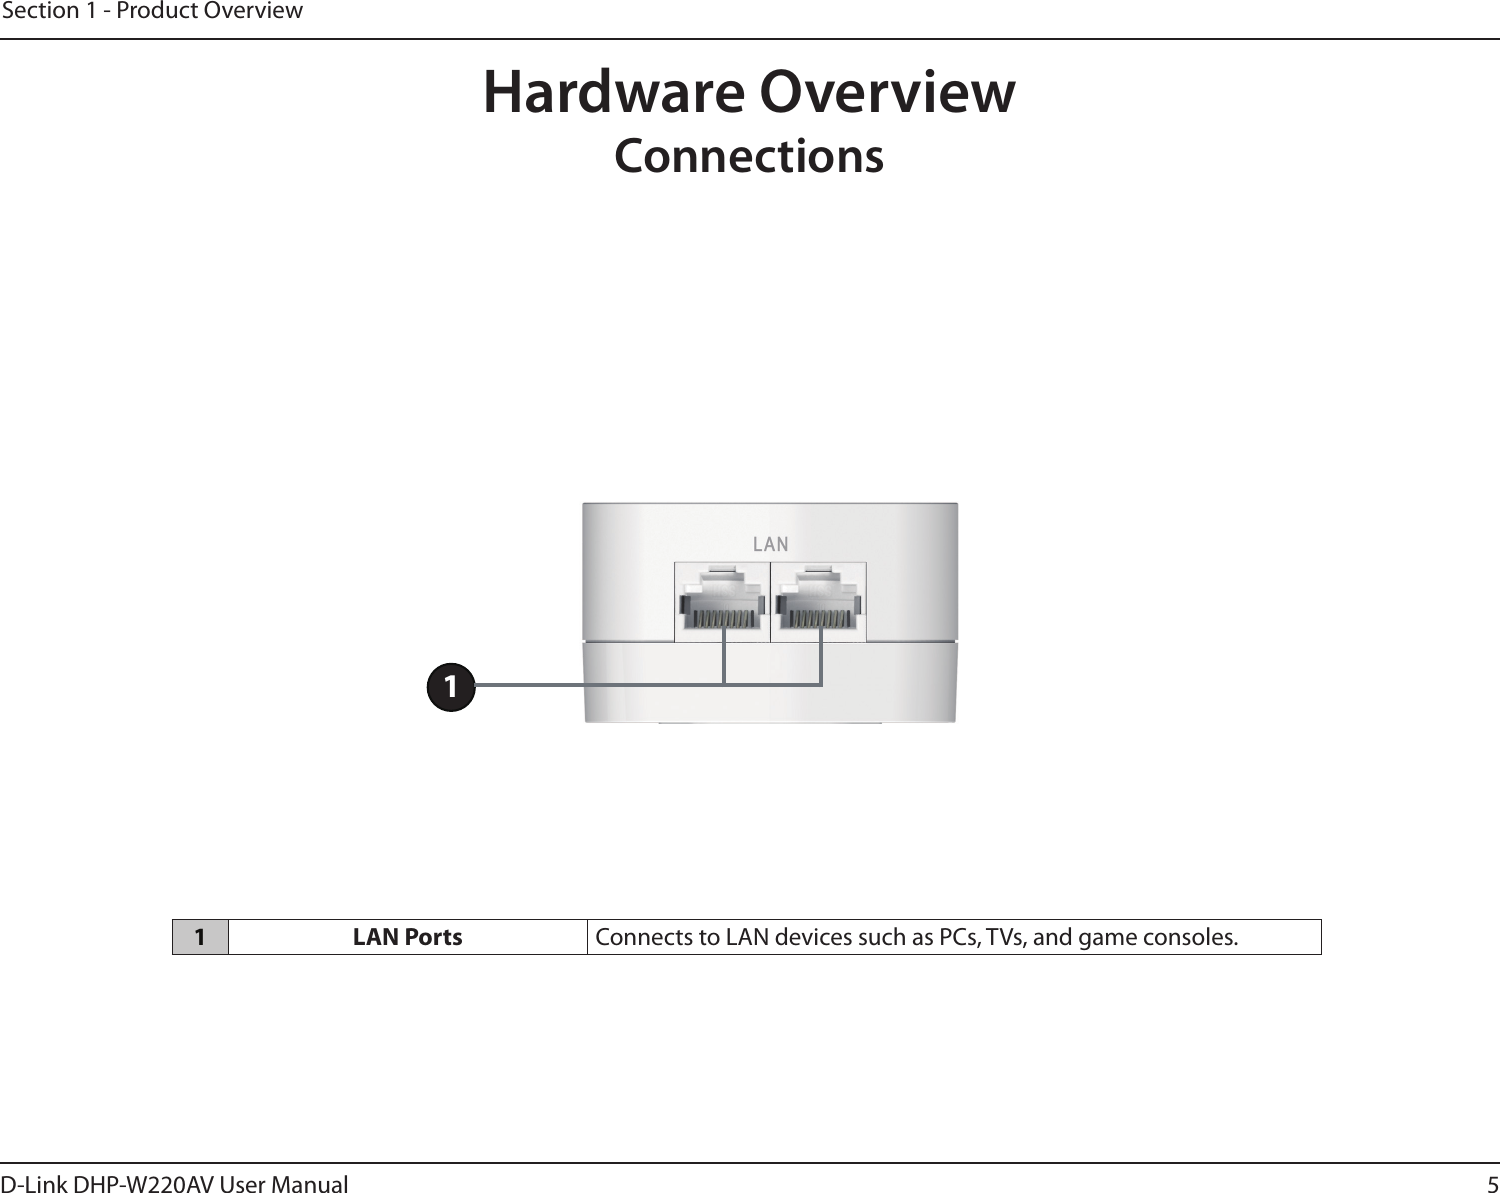 5D-Link DHP-W220AV User ManualSection 1 - Product OverviewHardware OverviewConnections1LAN Ports Connects to LAN devices such as PCs, TVs, and game consoles.1